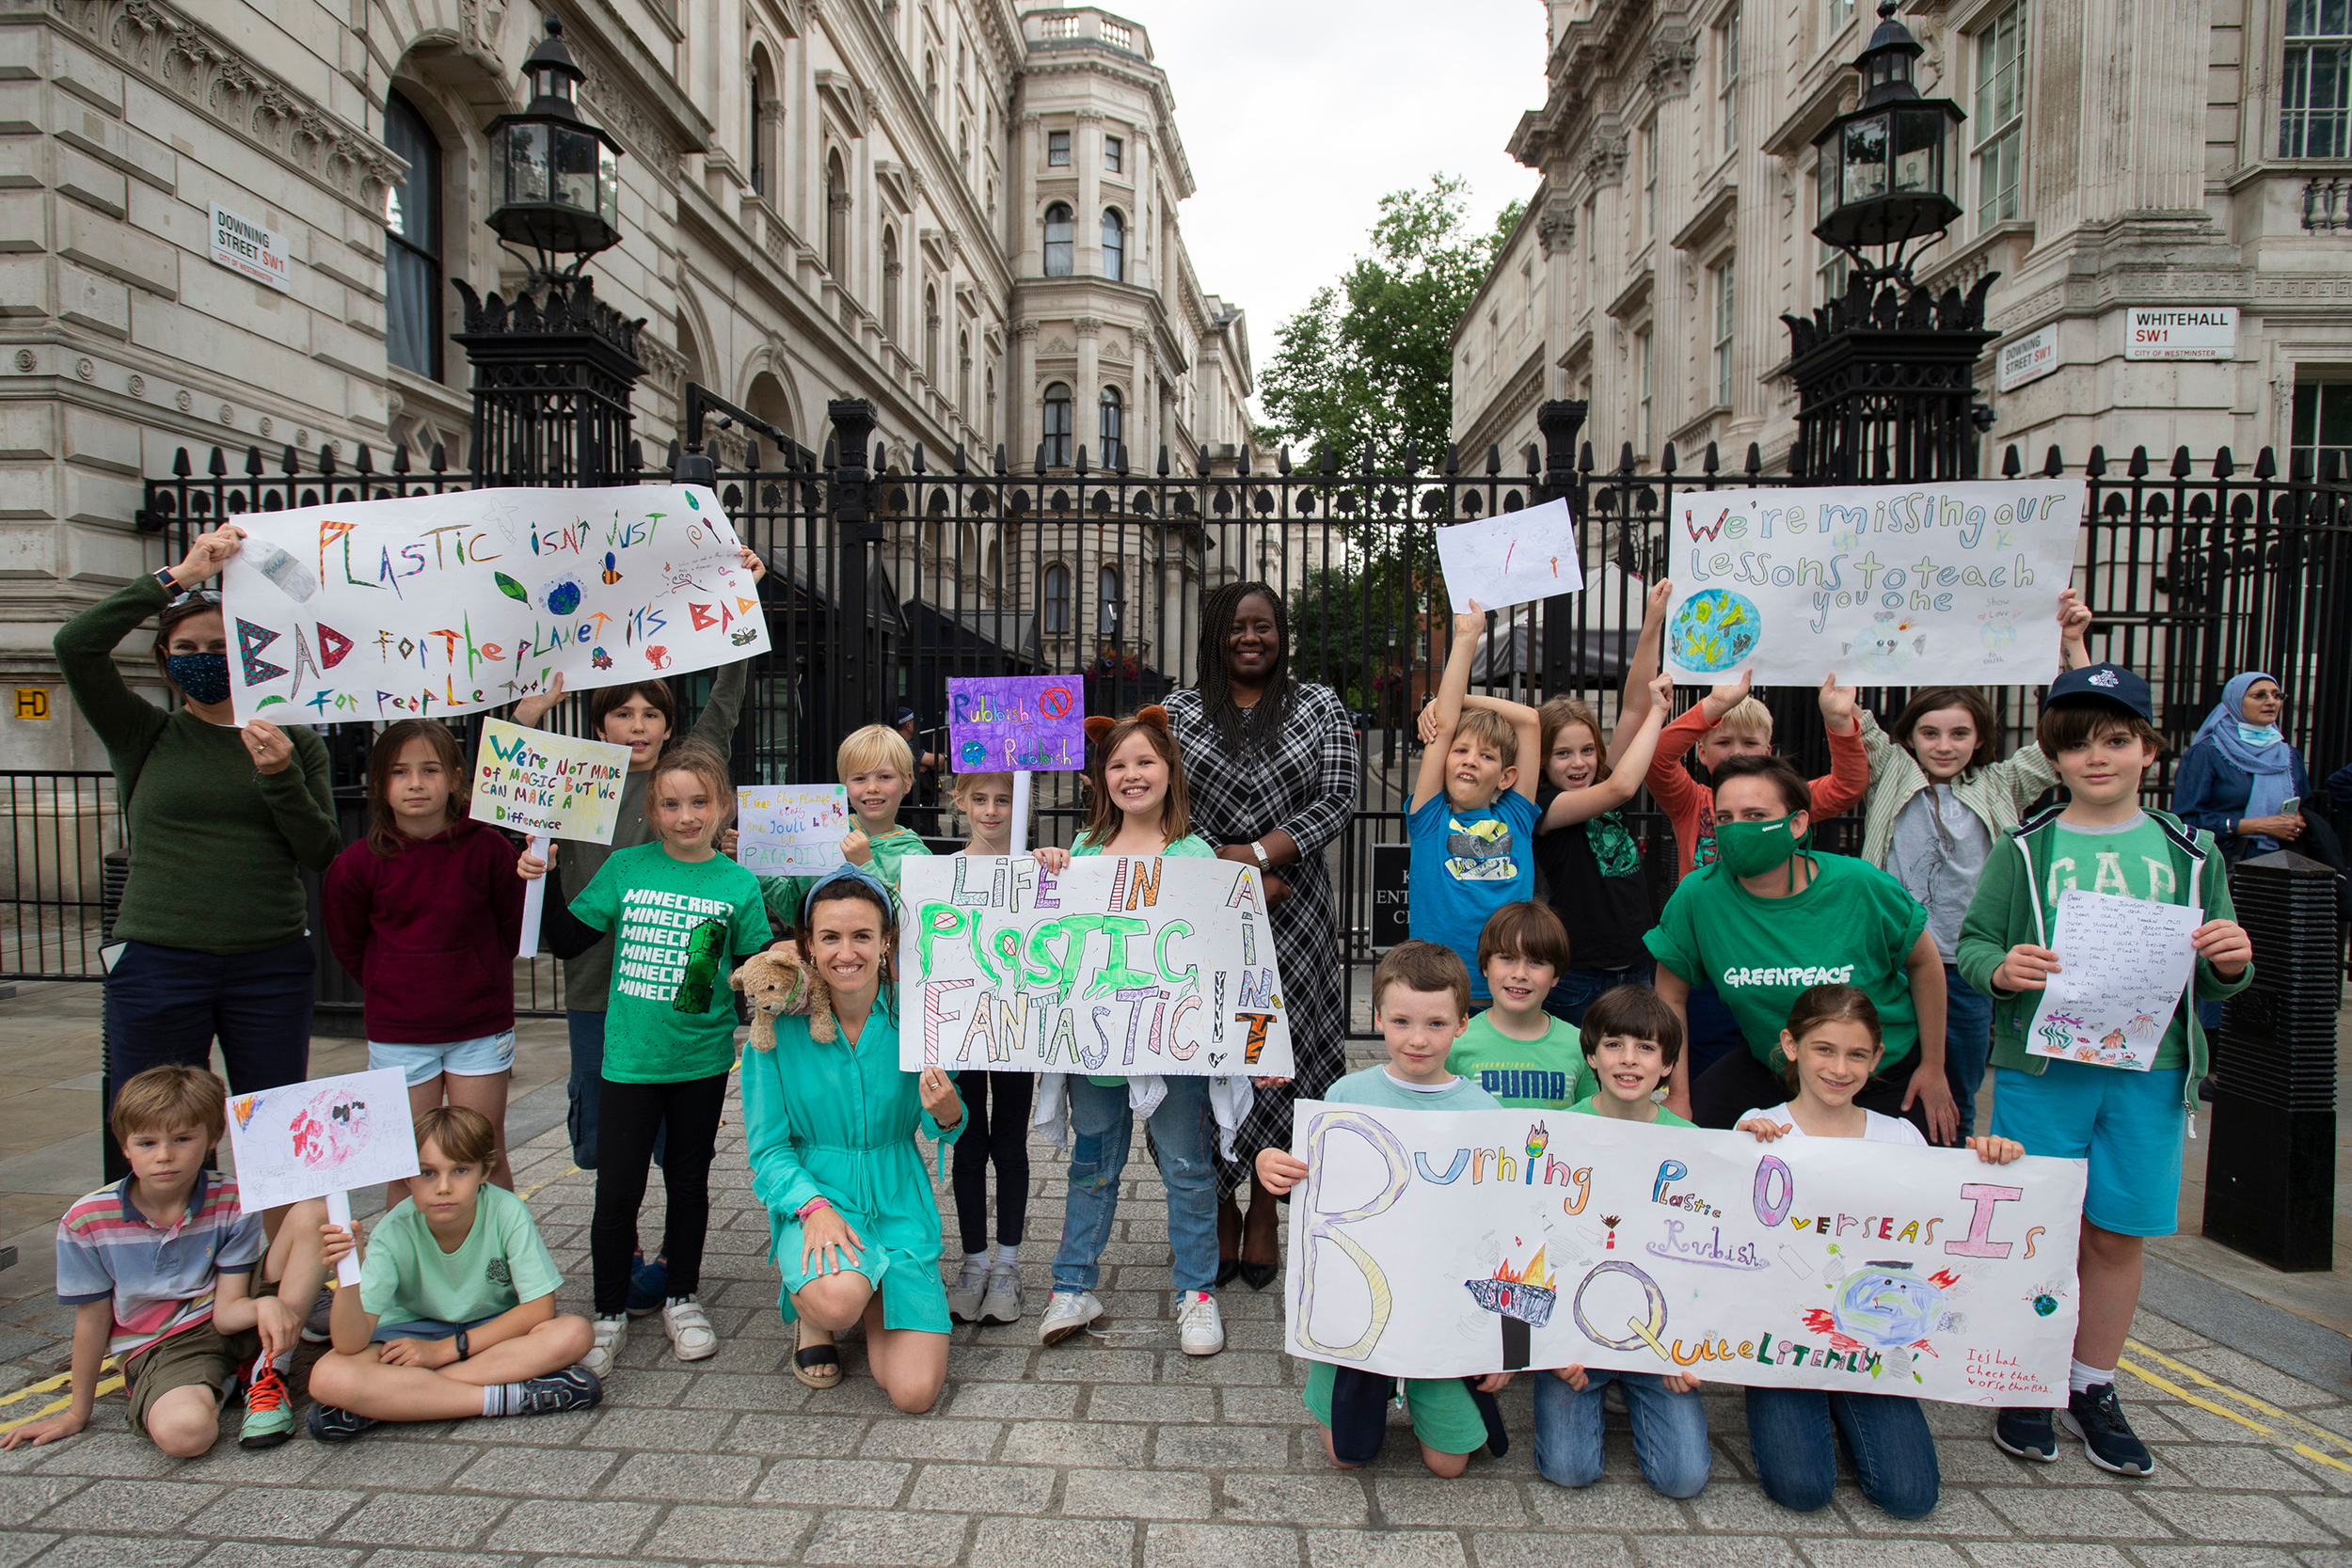 A large group of children stand in front of the railings of Downing Street holding colourful hand-drawn signs calling for an end to plastic waste exports.